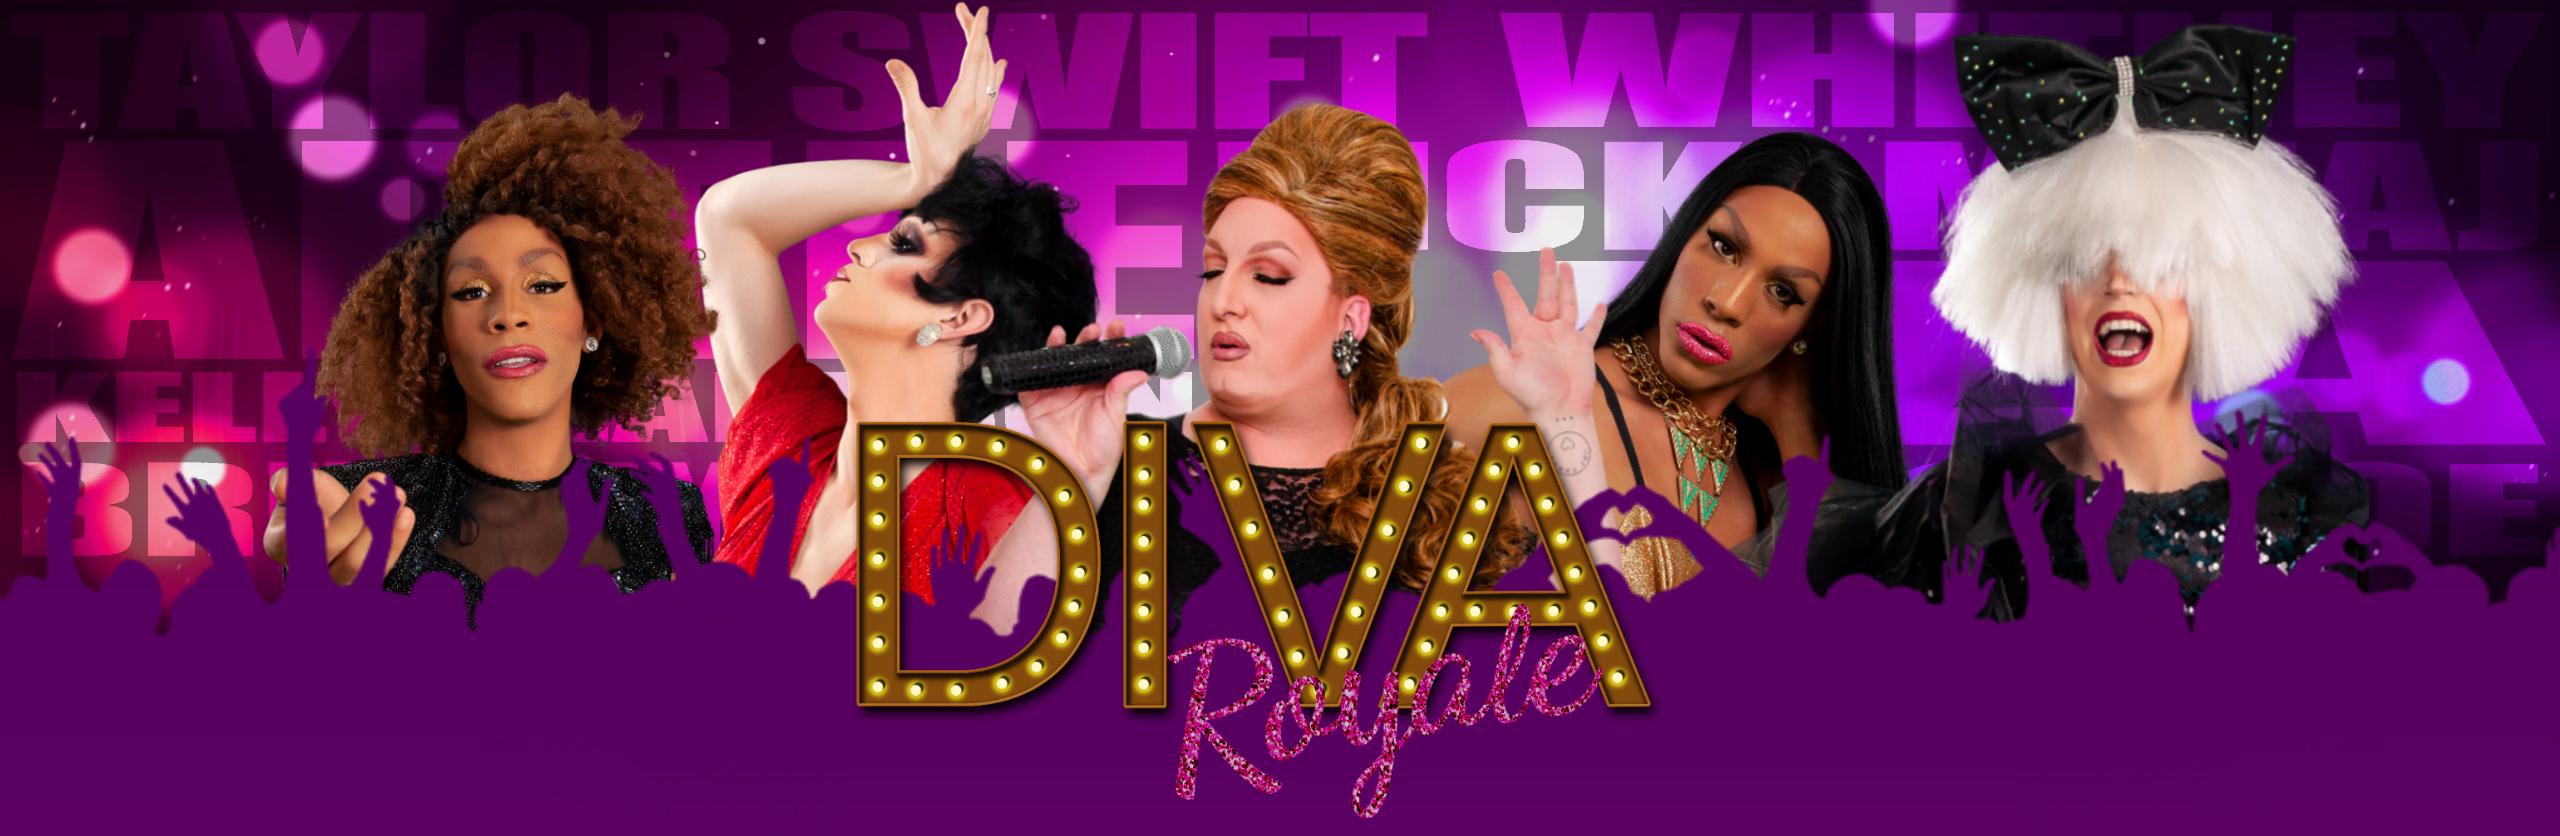 Diva Royale Drag Queen Show New York City, NY - Weekly Drag Queen Shows in New York, NY